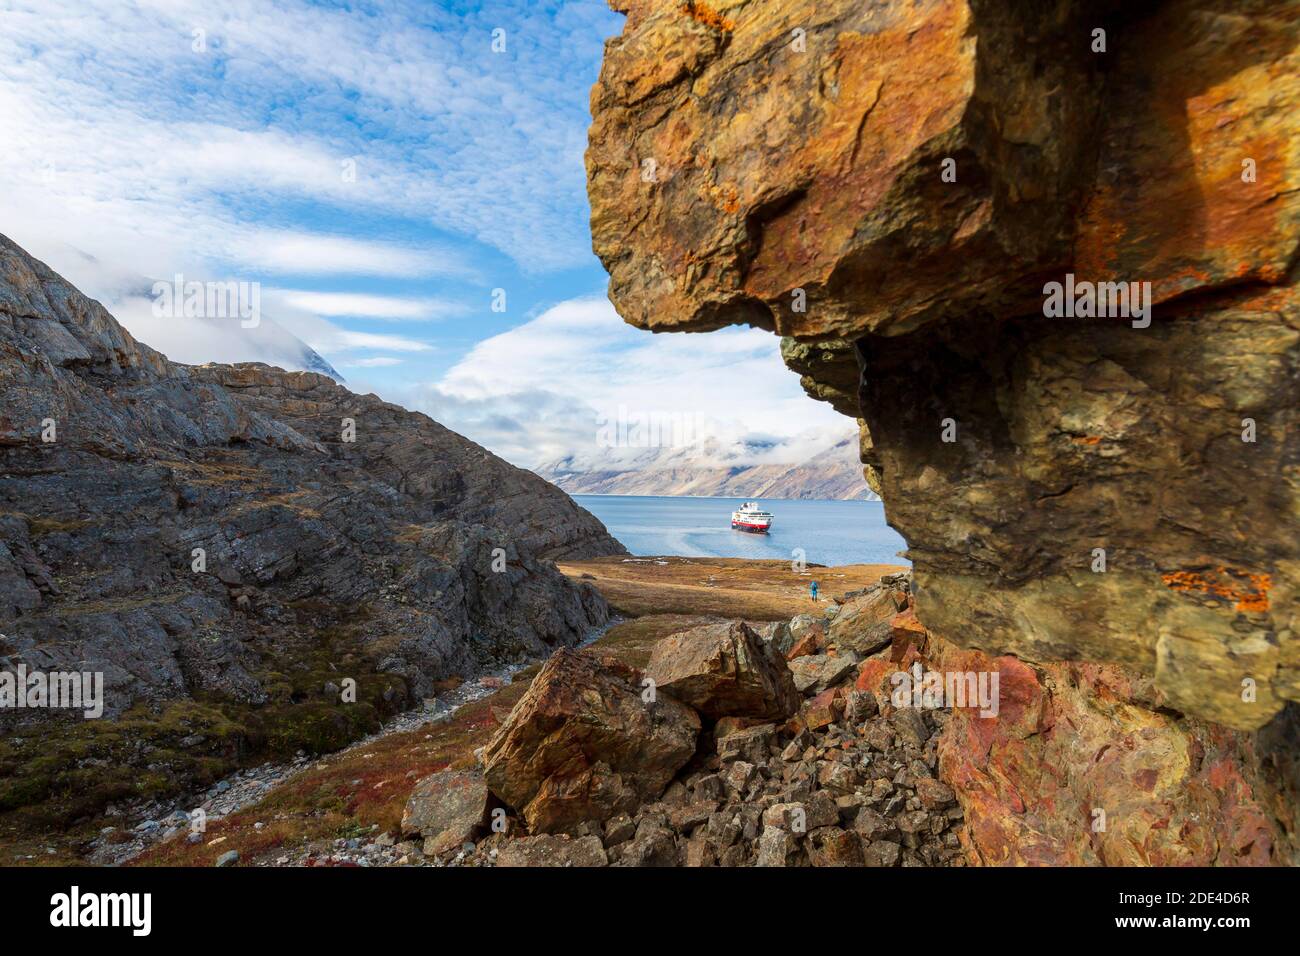 Cruise ship in fjord on the east coast of Greenland, rocks, lichens, Greenland, Denmark Stock Photo